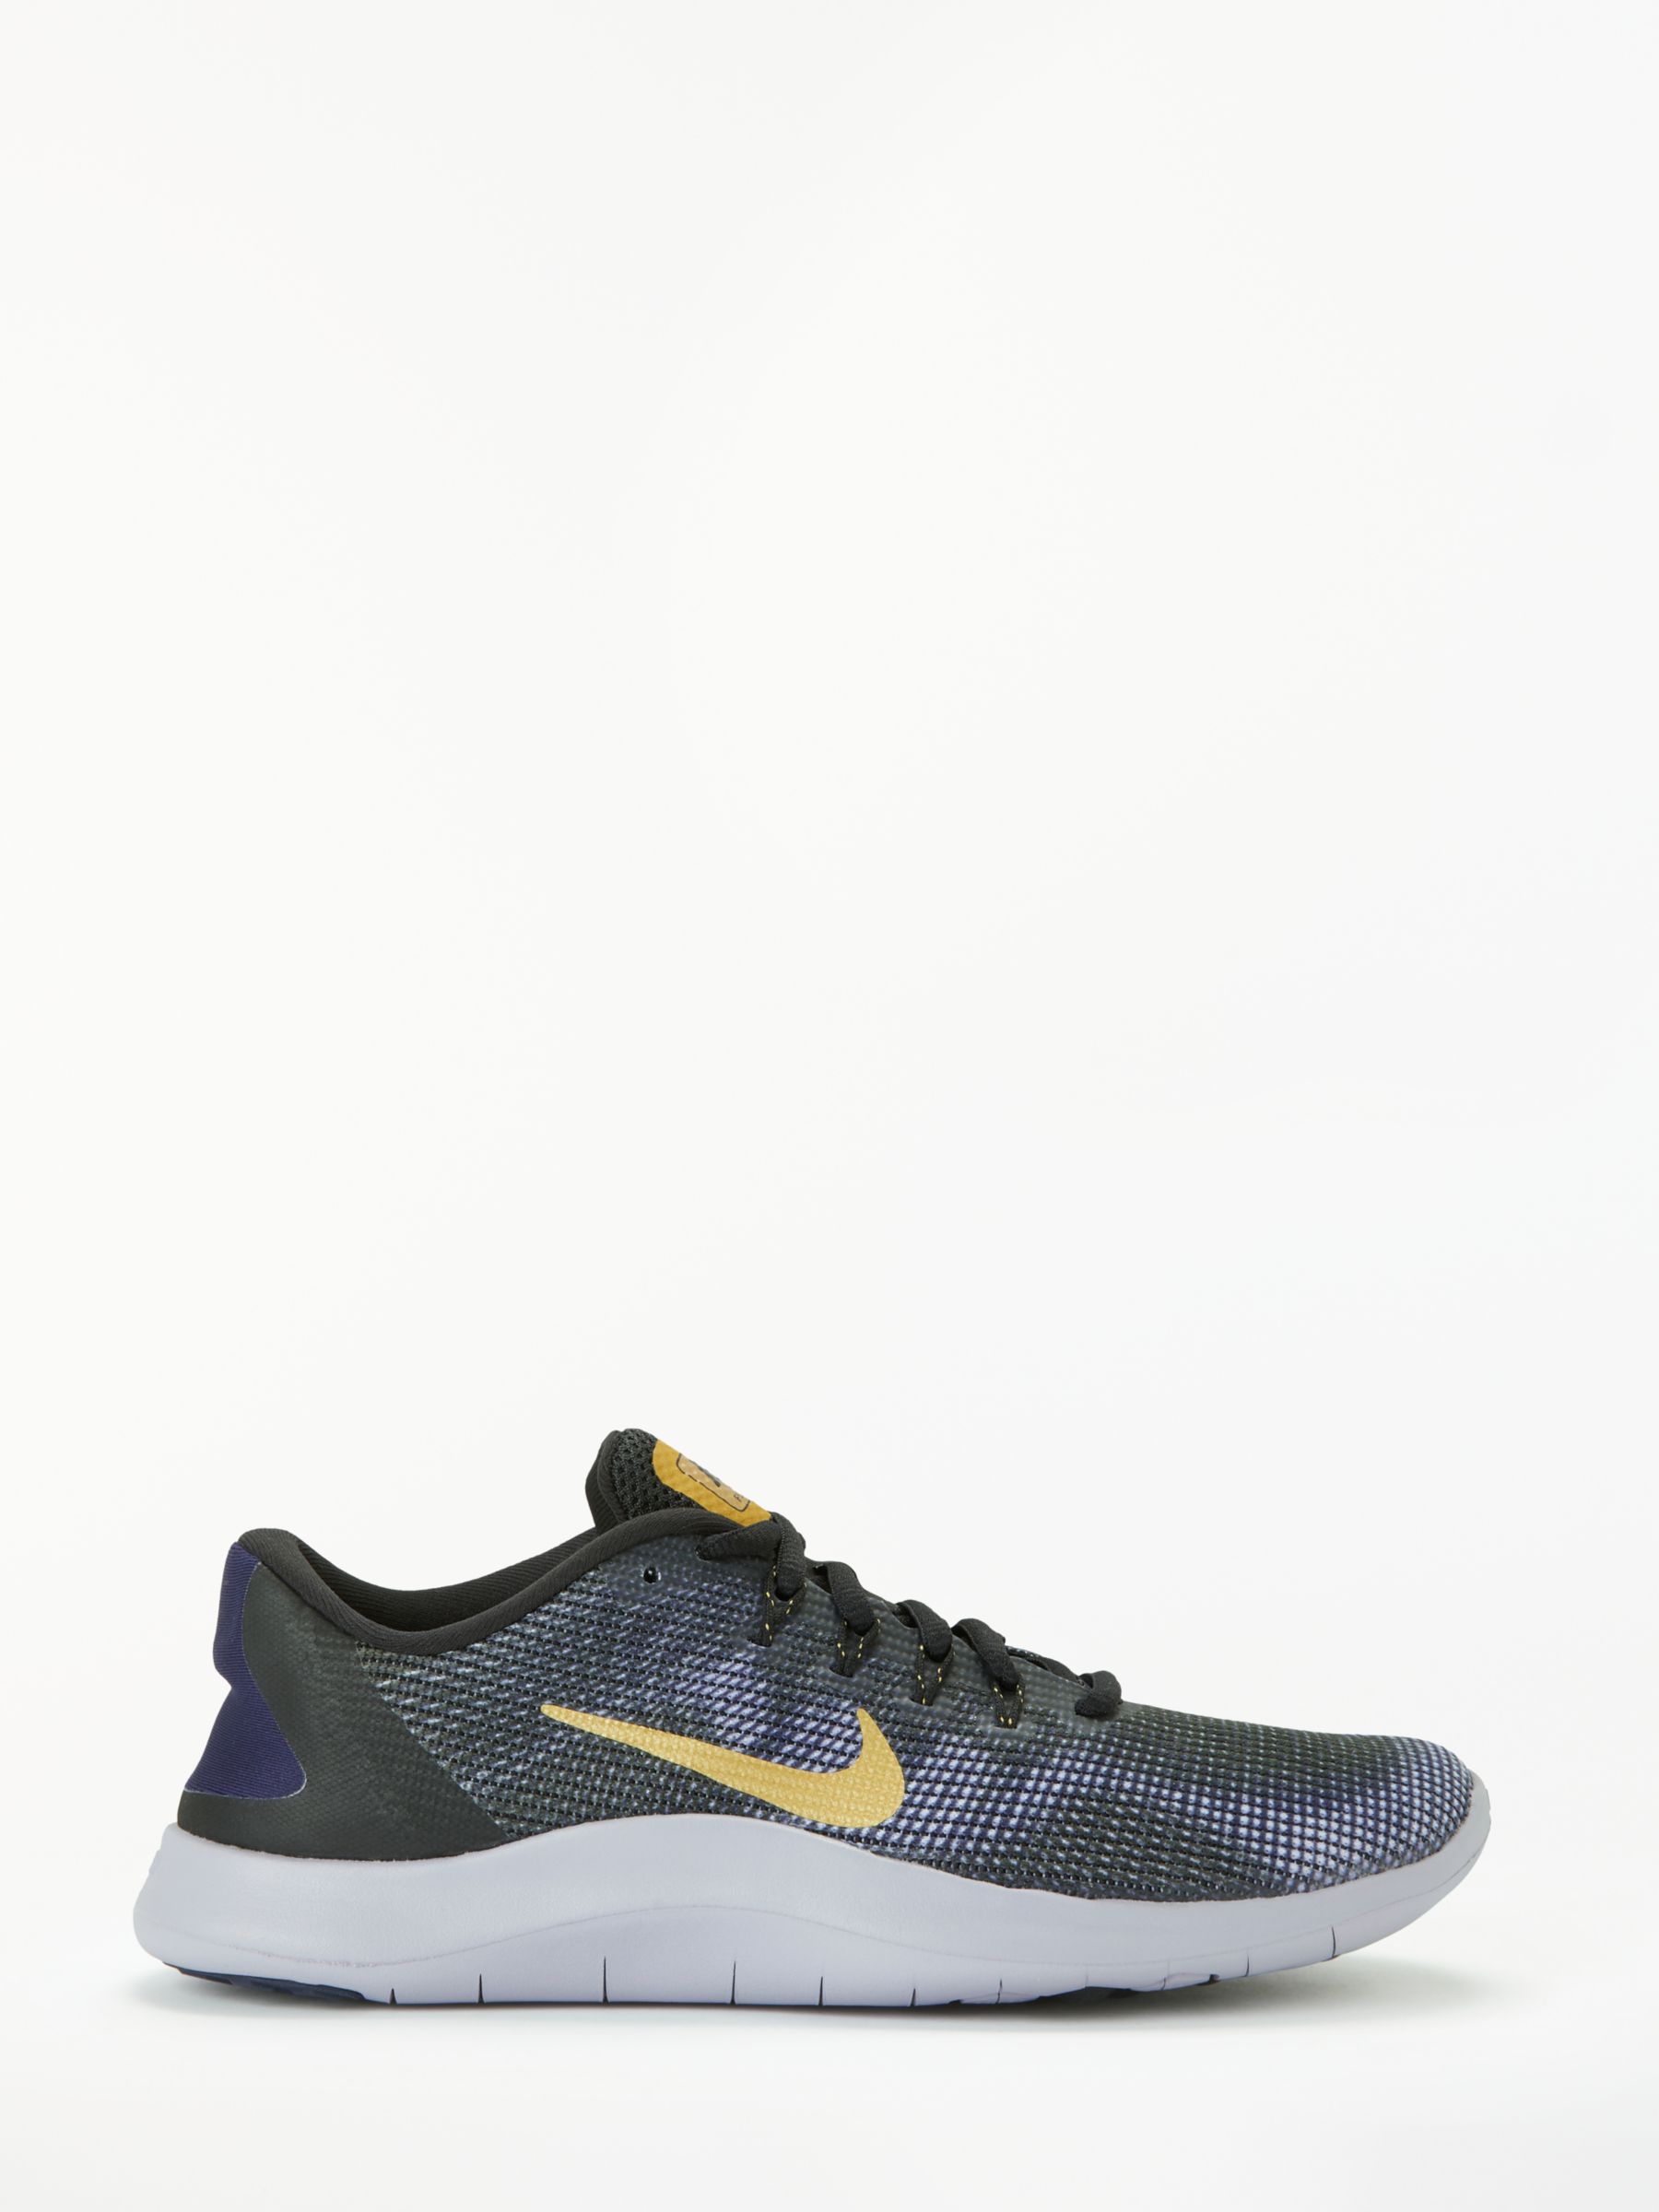 gold and black nike trainers